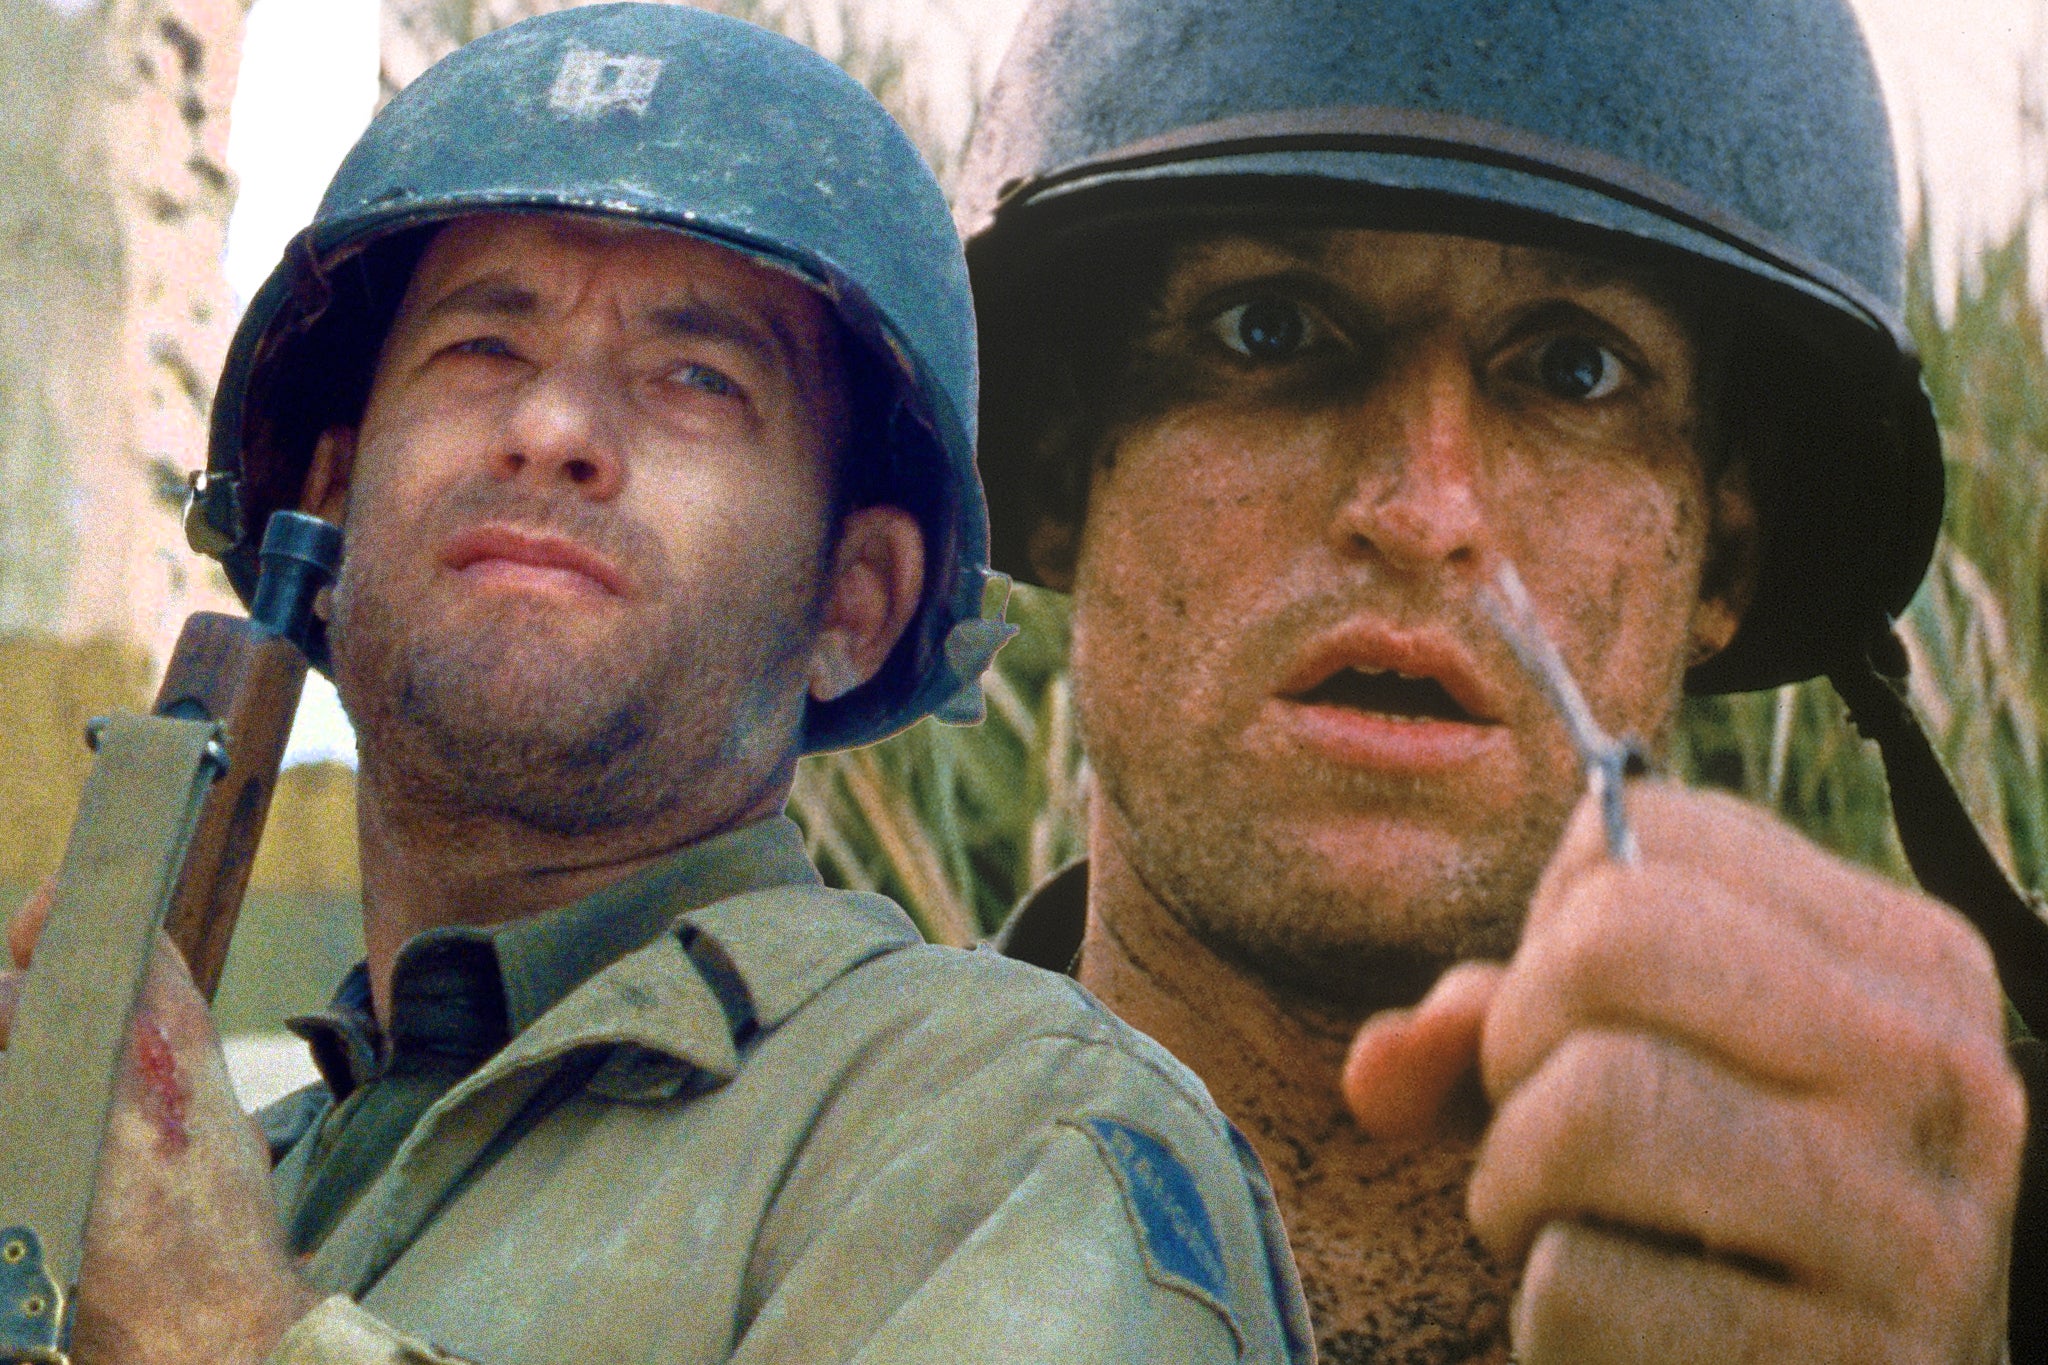 Spielberg vs Malick: Tom Hanks in ‘Saving Private Ryan’ and Woody Harrelson in ‘The Thin Red Line’